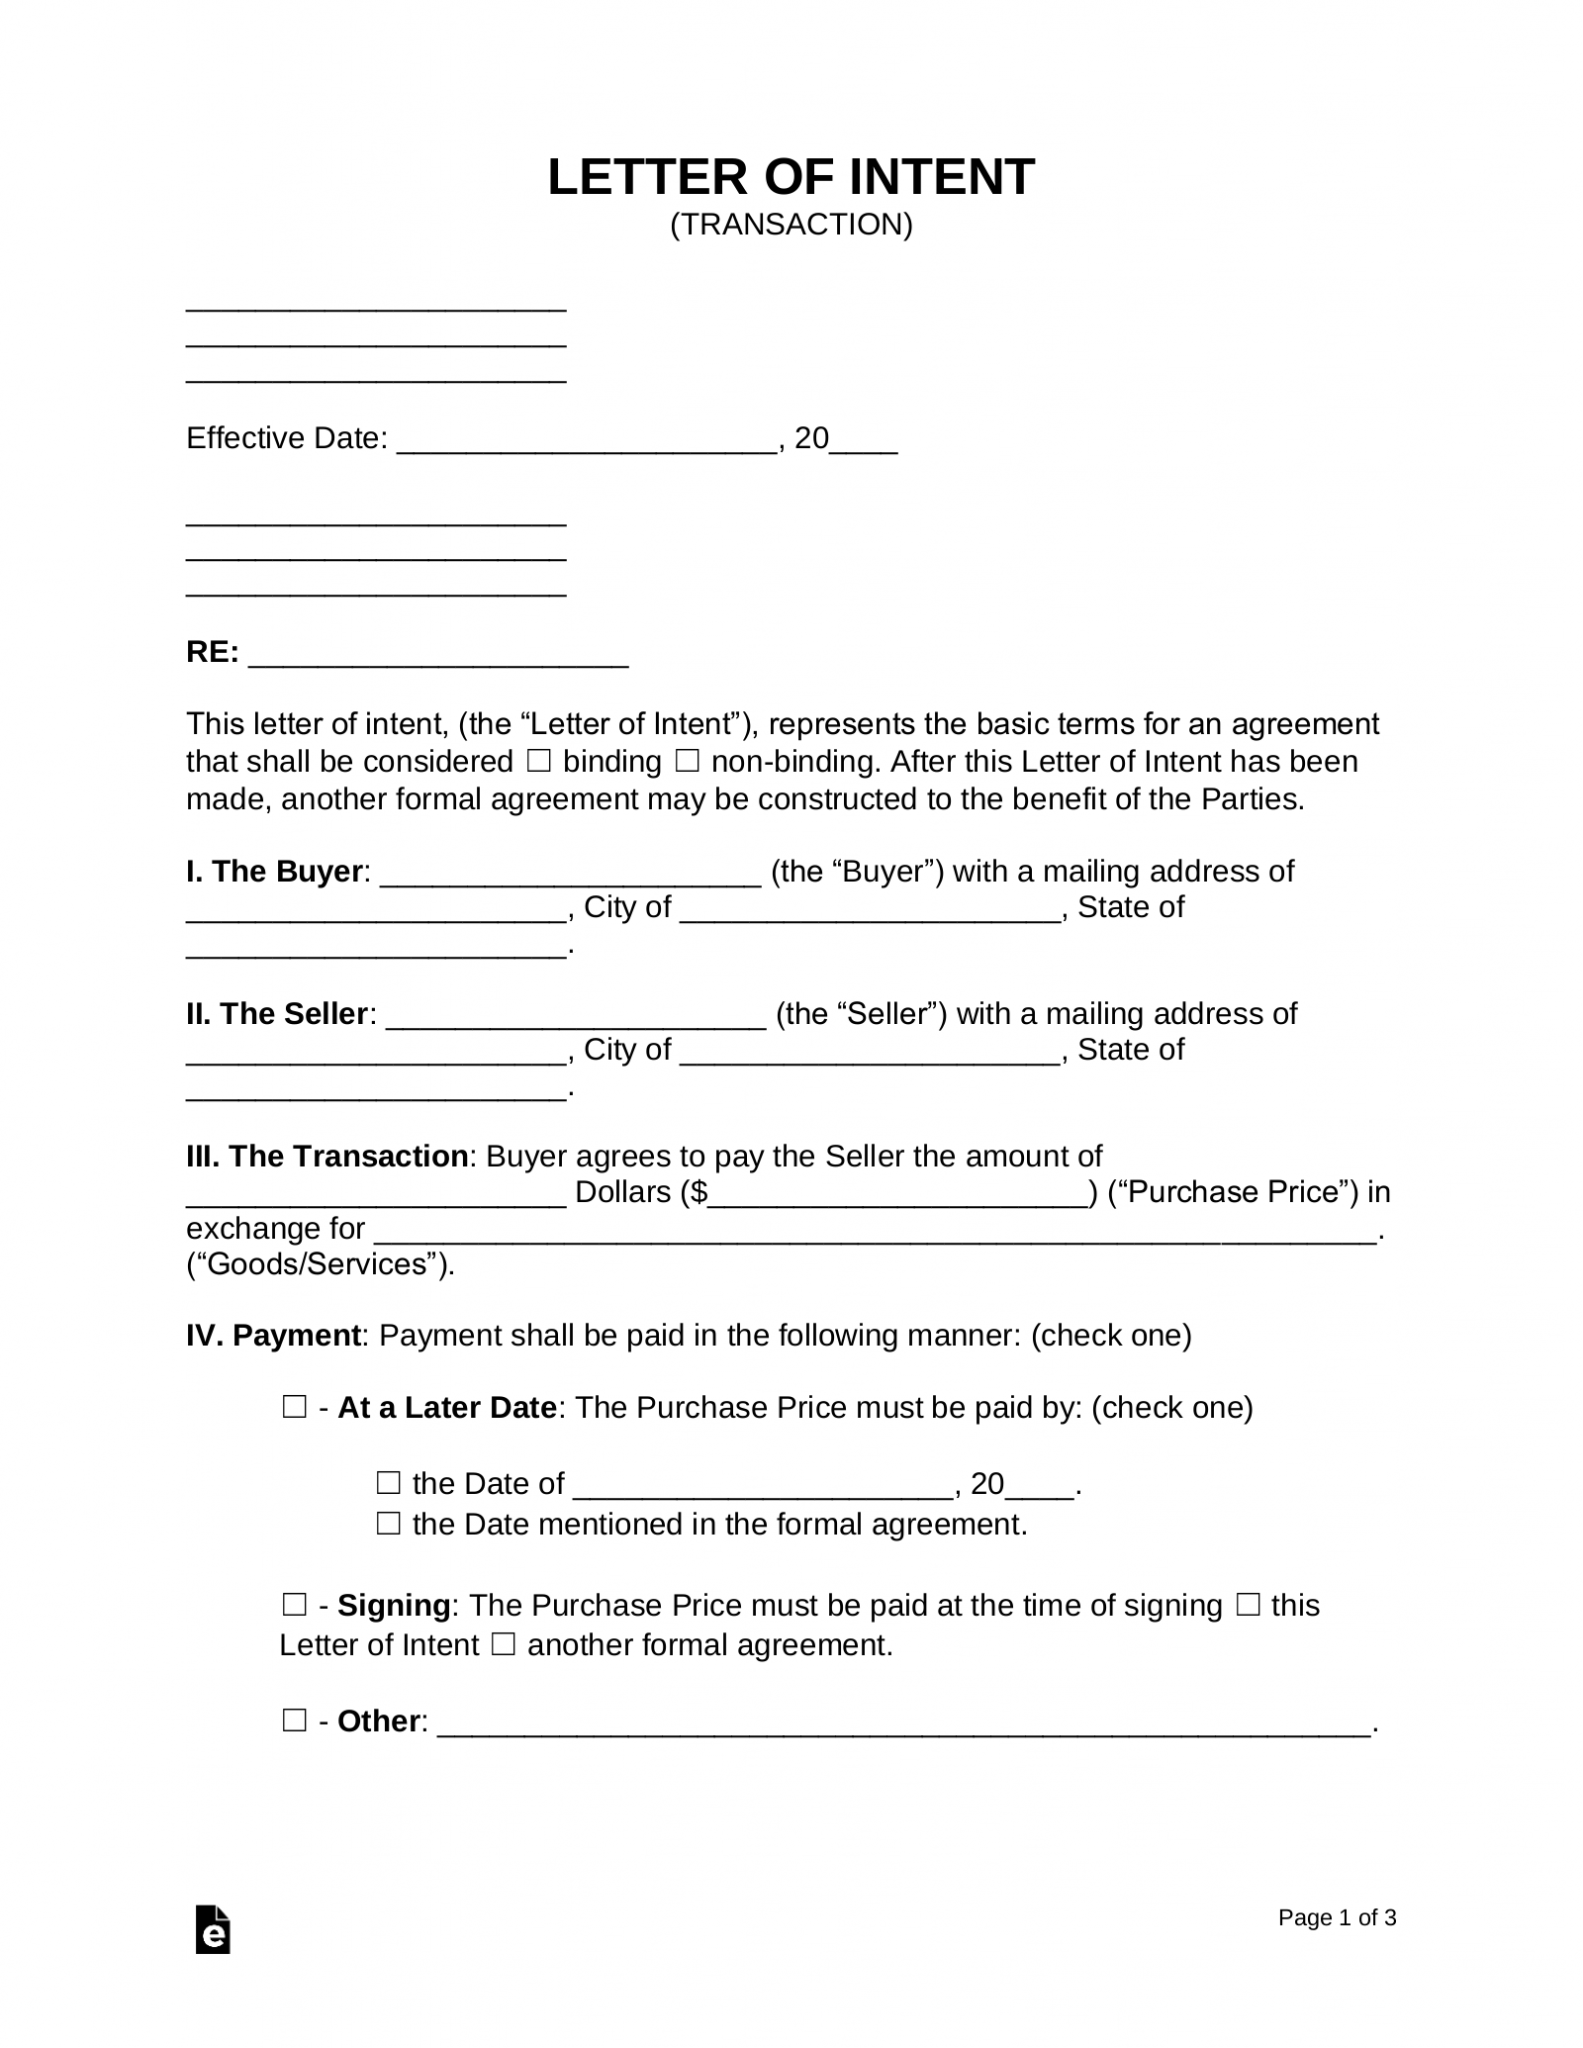 Free Letter of Intent (LOI) Templates (14) - PDF | Word – eForms